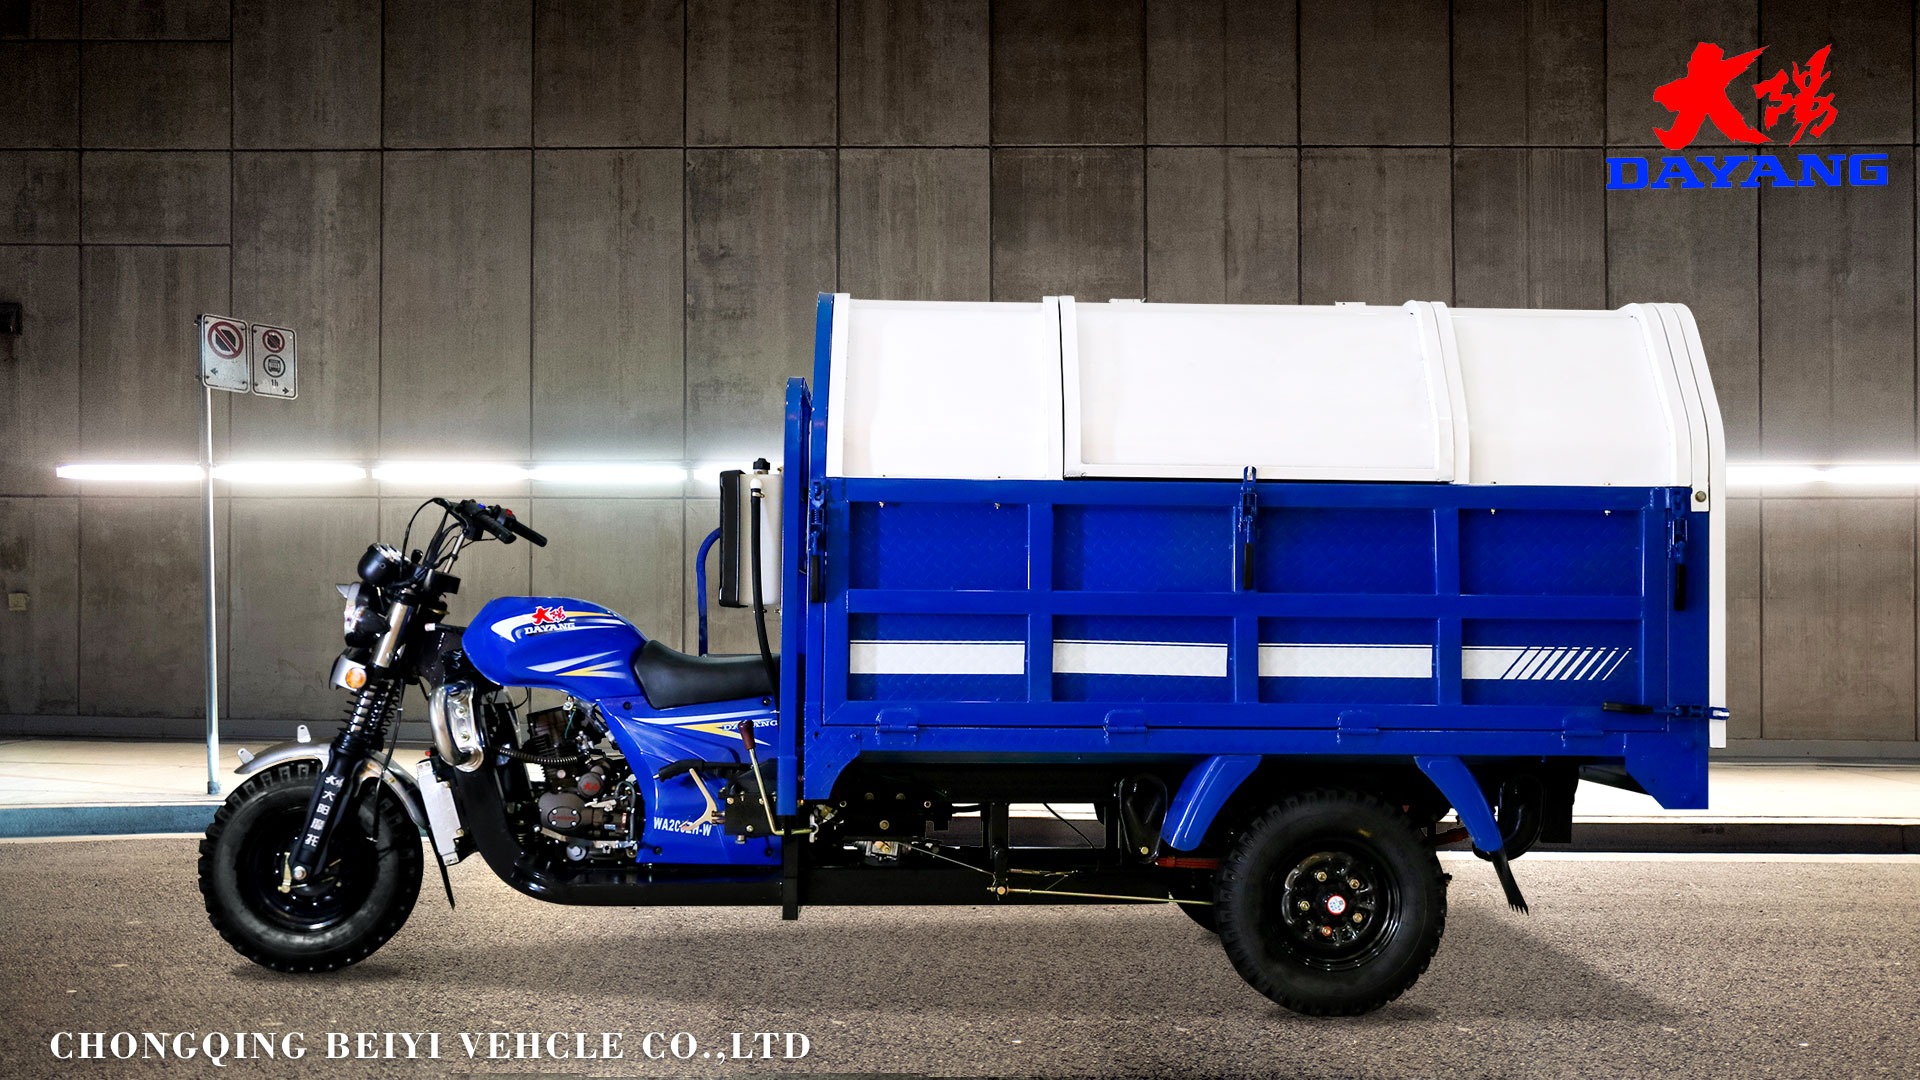 DY-L1 High Quality hot sell in Sudan Automation Small Dumper Garbage Truck Tricycle cargo 3 wheel motorcycle truck For Sale